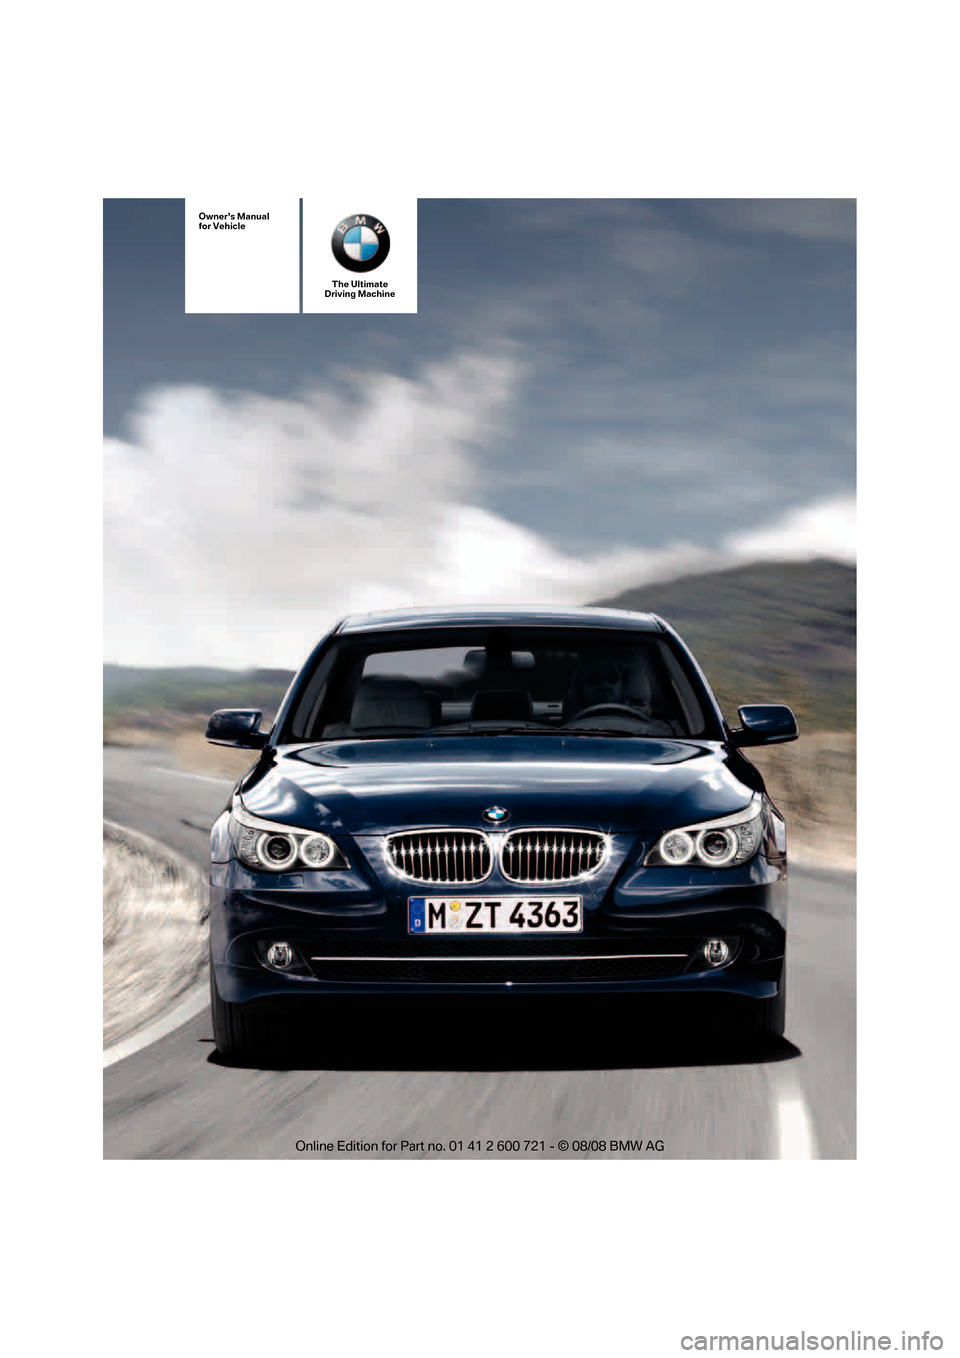 BMW 530I TOURING 2009 E61 Owners Manual The Ultimate
Driving Machine
Owners Manual
for Vehicle 